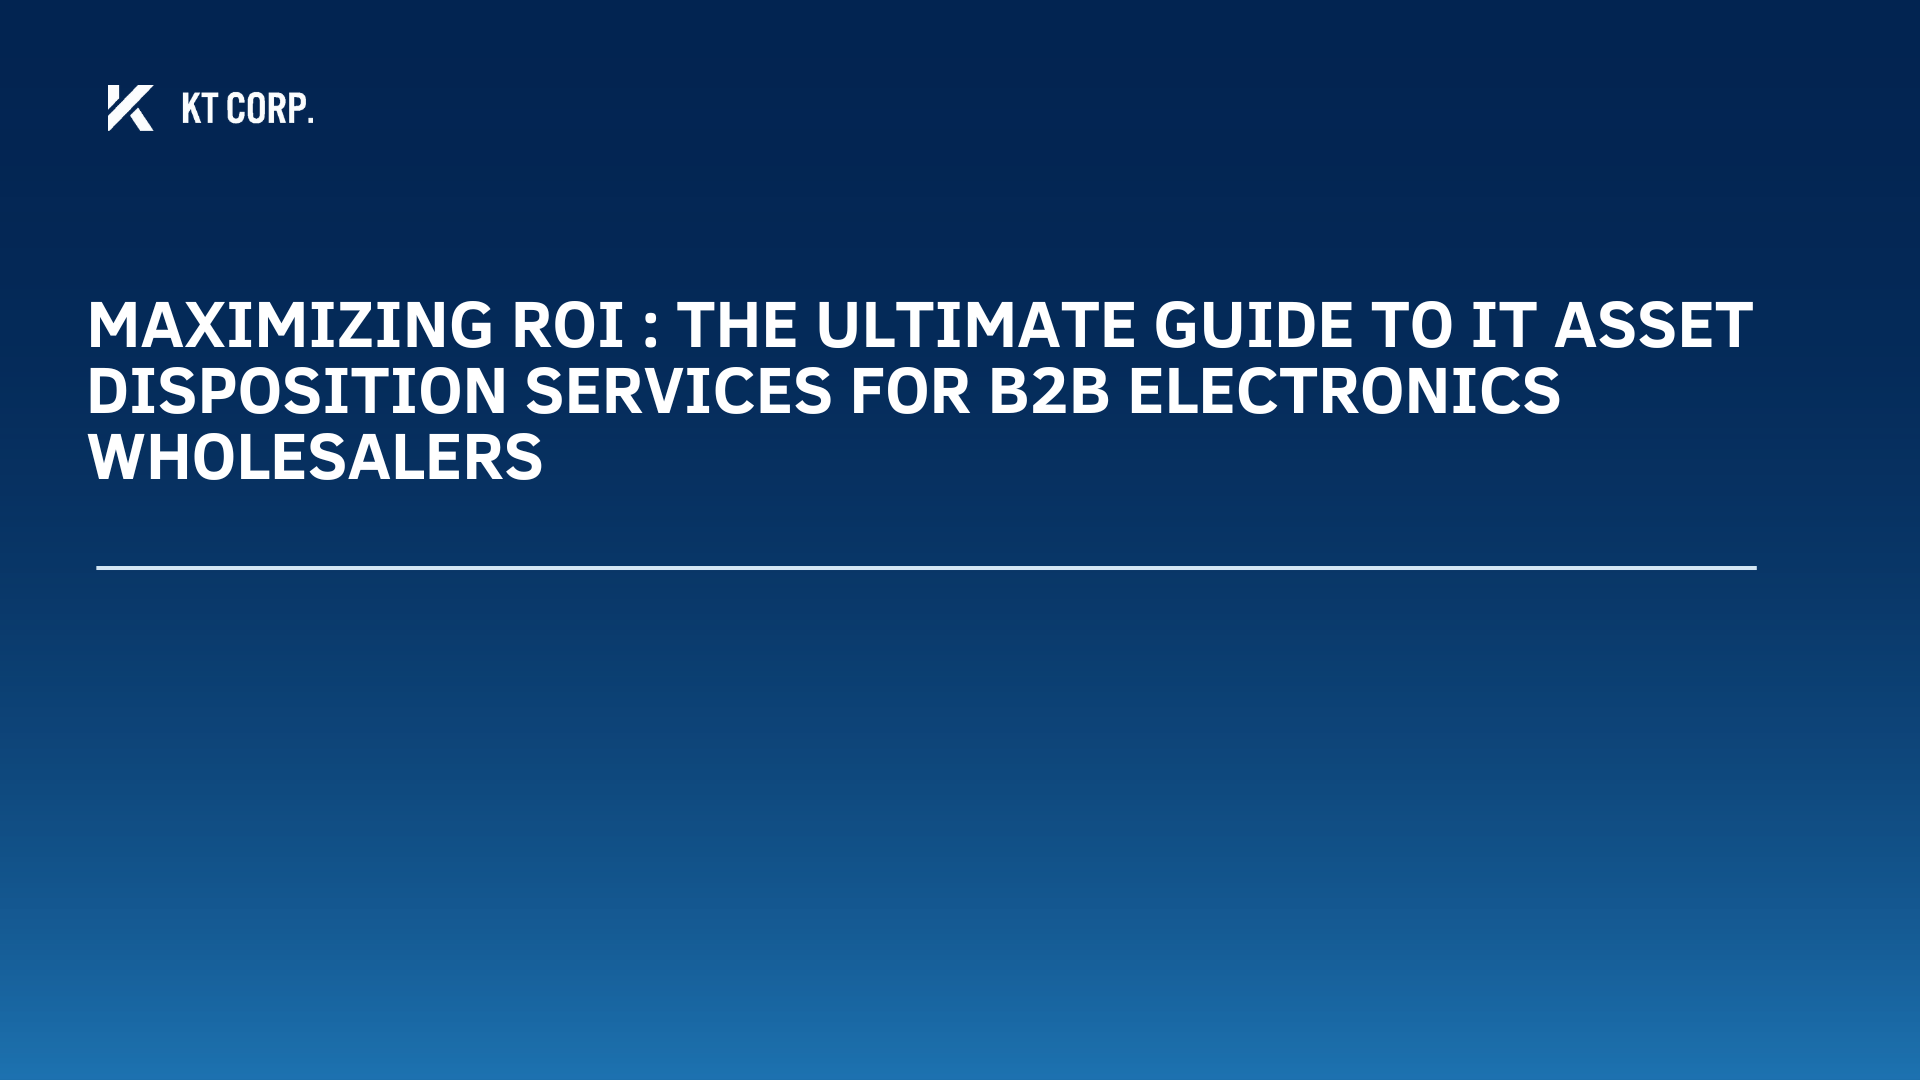 Maximizing ROI : The ultimate Guide to IT Asset Disposition Services for B2B Electronics Wholesalers<br />
